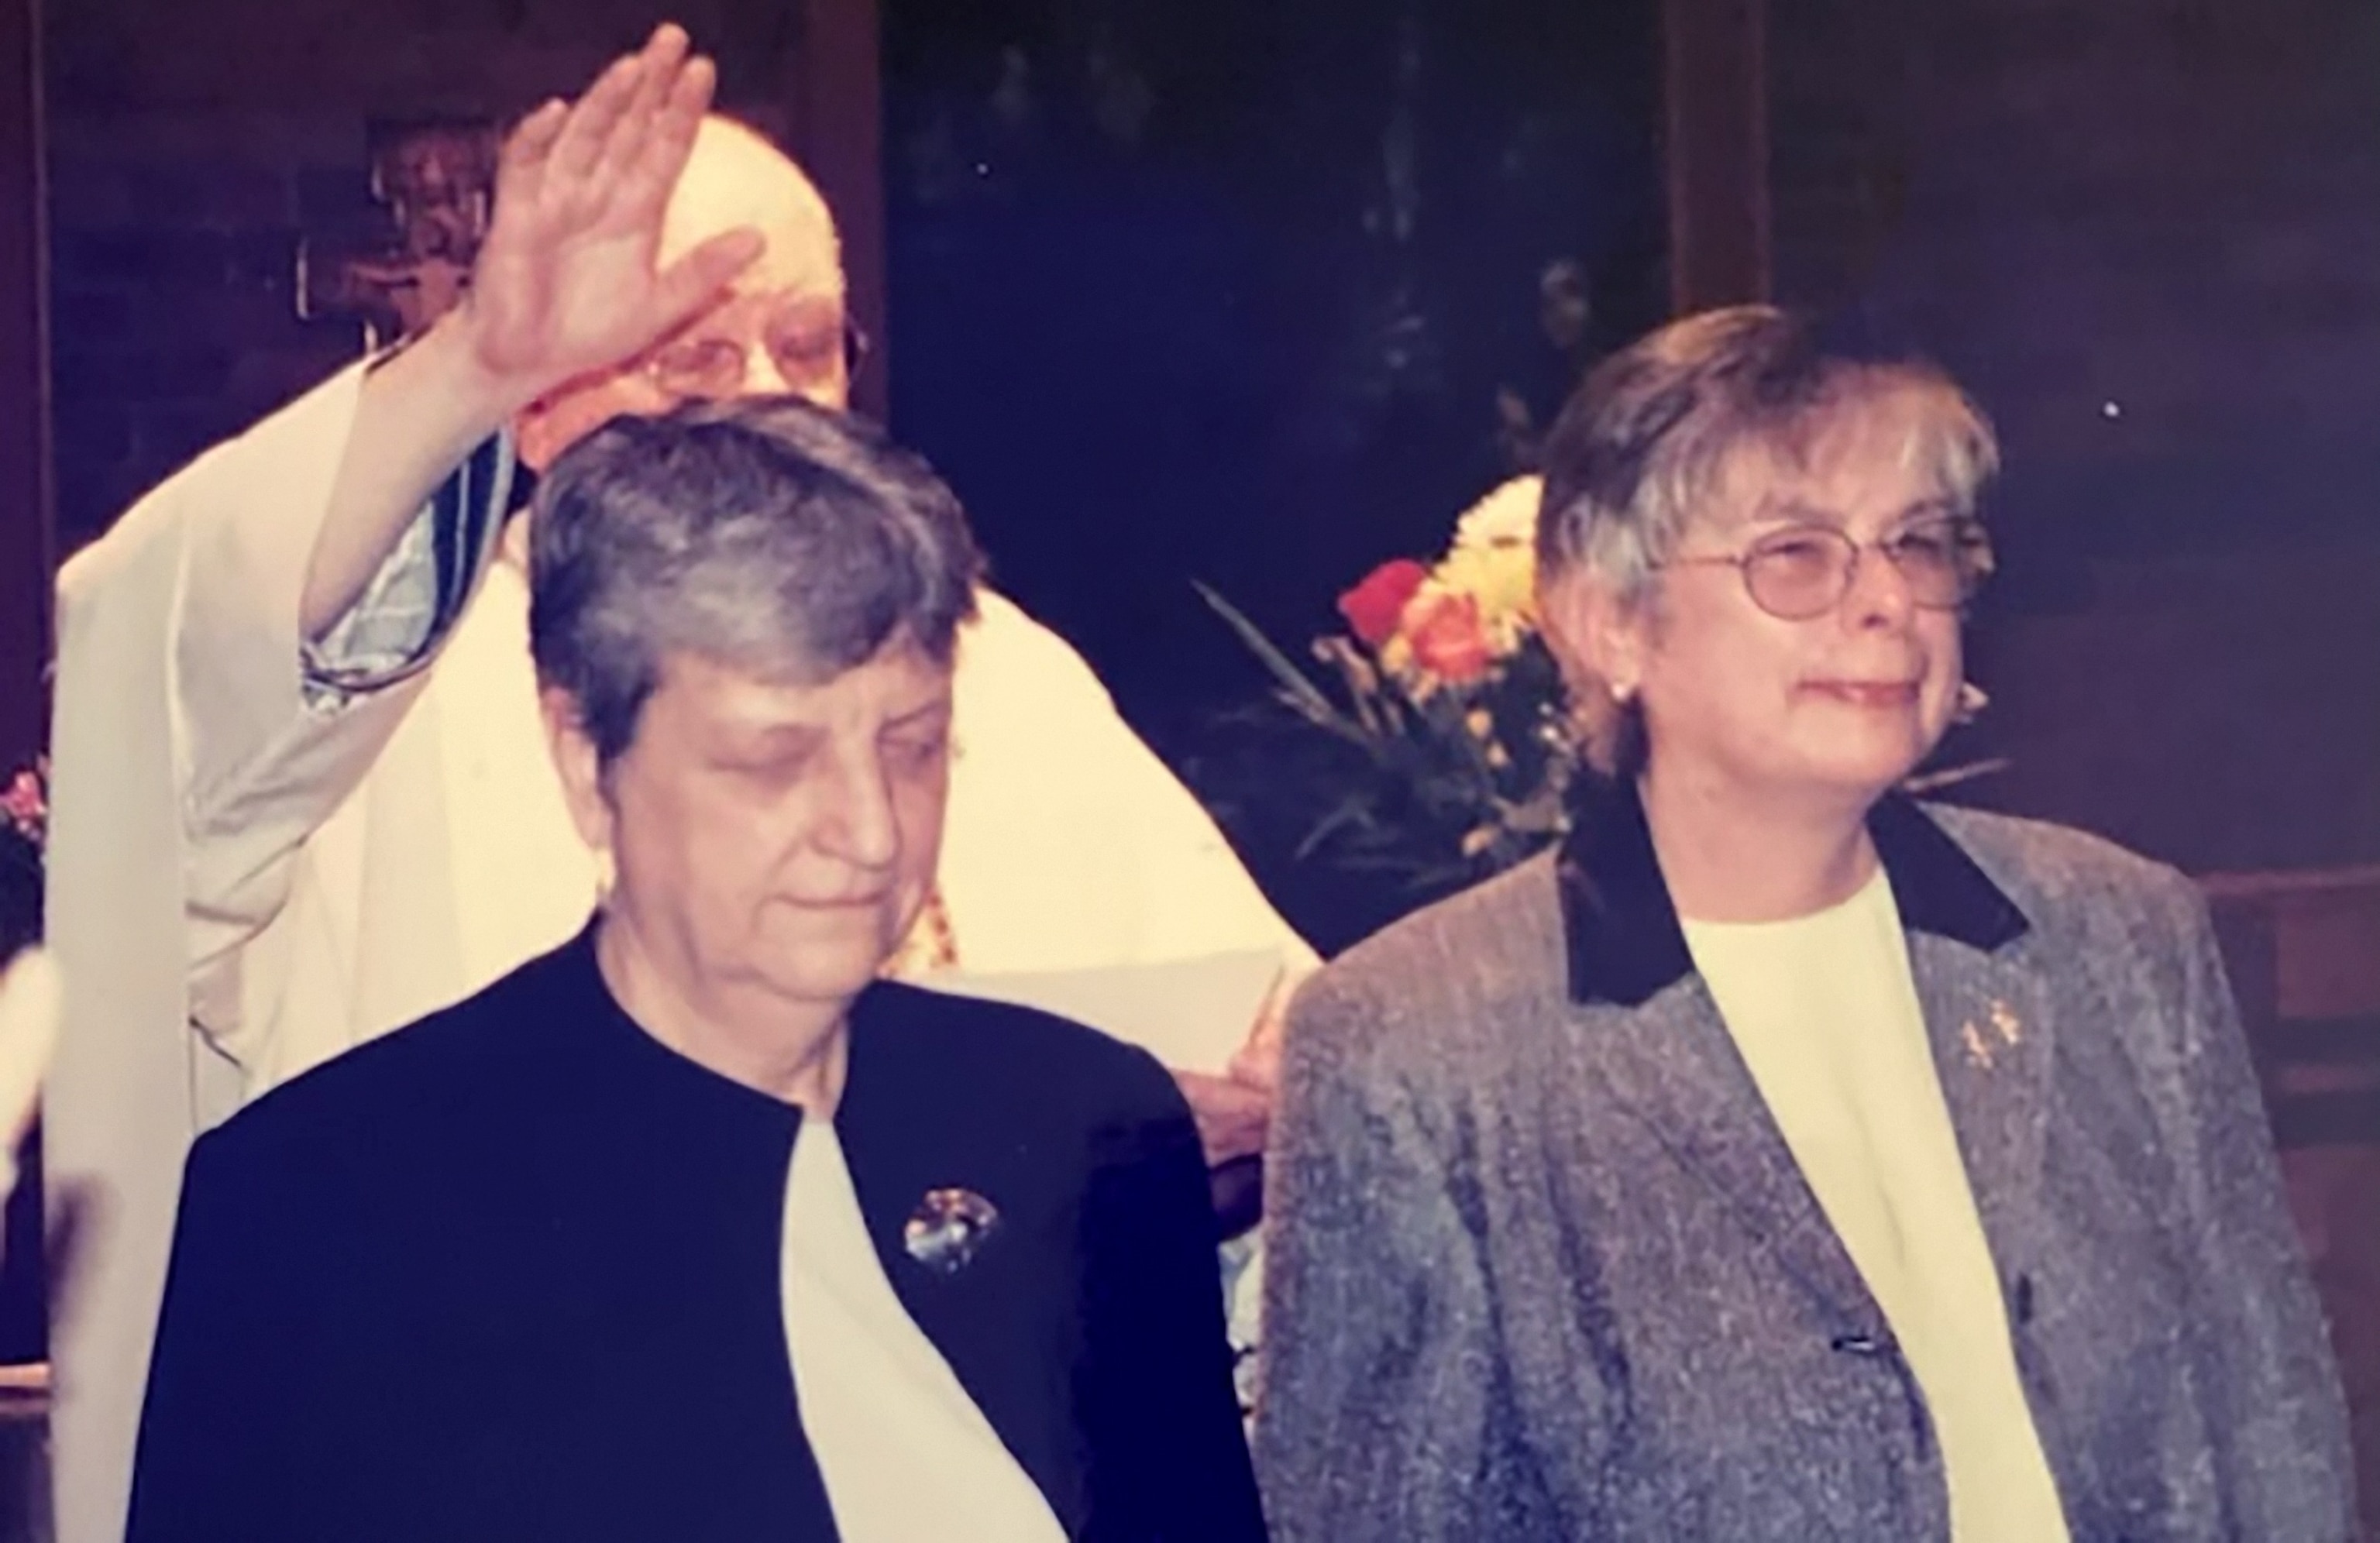 PHOTO: Roe Sauerzopf and Paula Acuti celebrate 25 years together with a marriage ceremony at the Church of St. Francis Xavier in 2004.